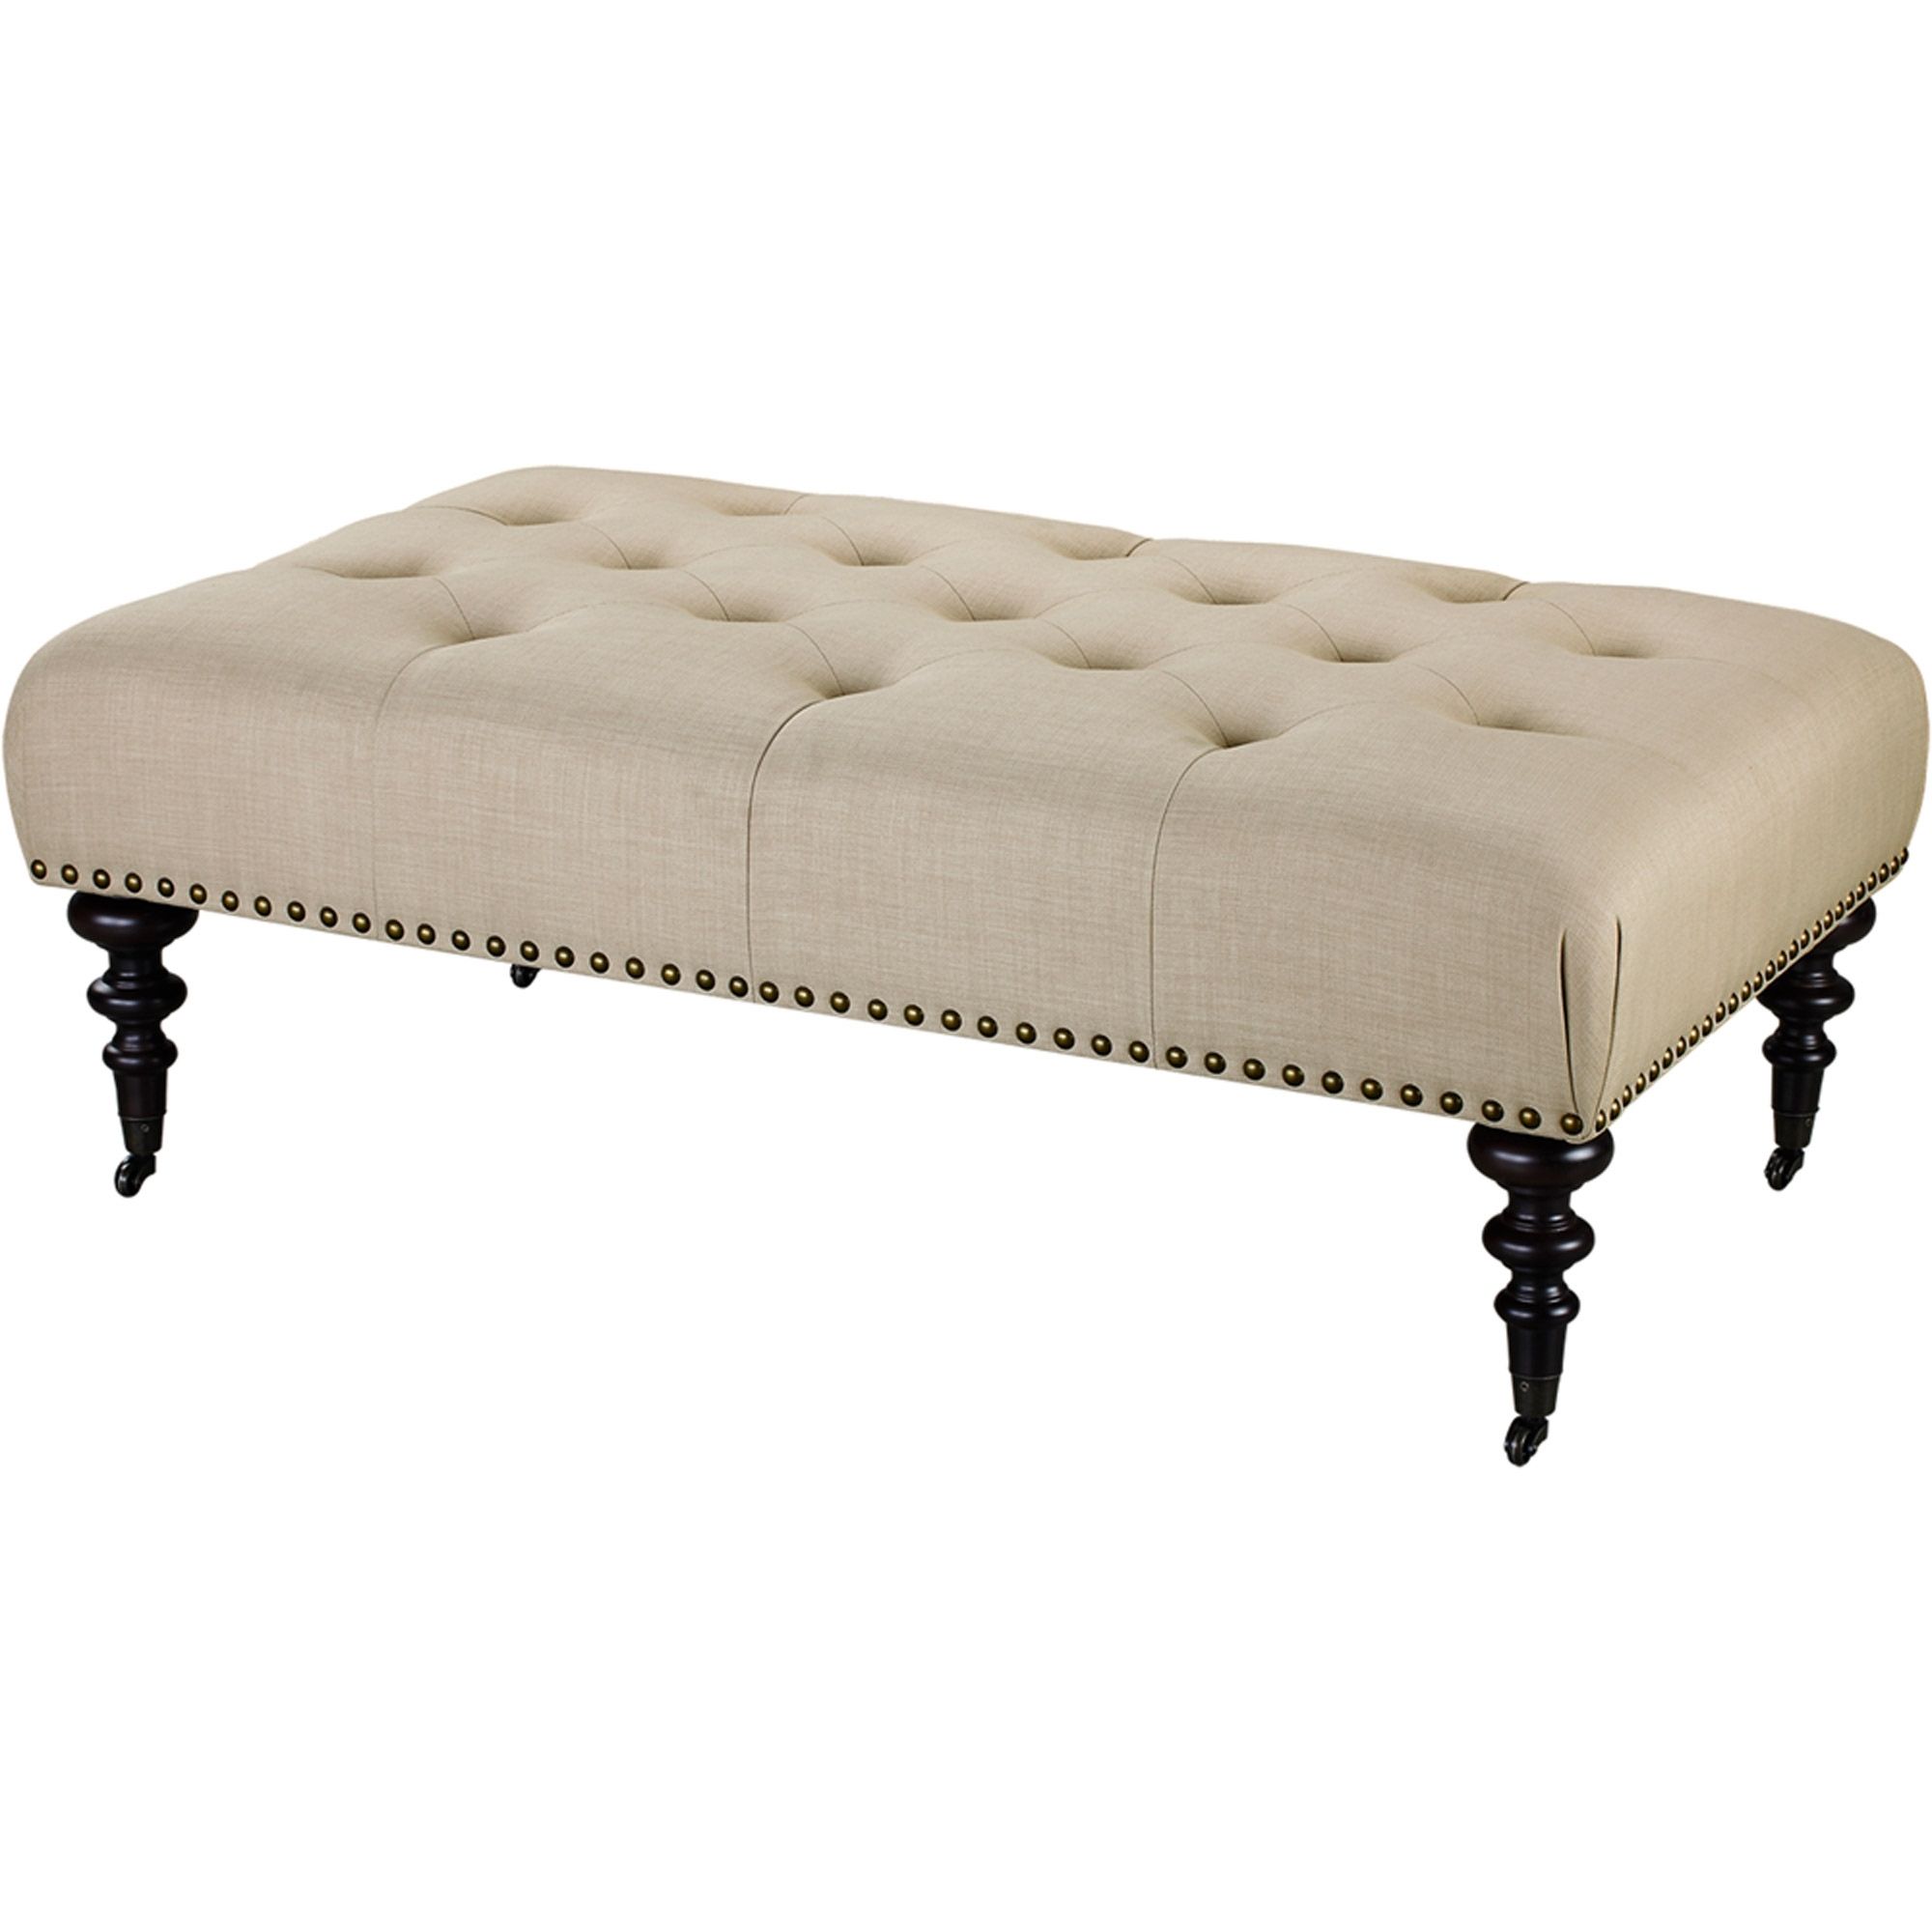 Ottomans With Wheels Pertaining To Current Dorel Living Winston Button Tufted Upholstered Ottoman, Beige (View 7 of 15)